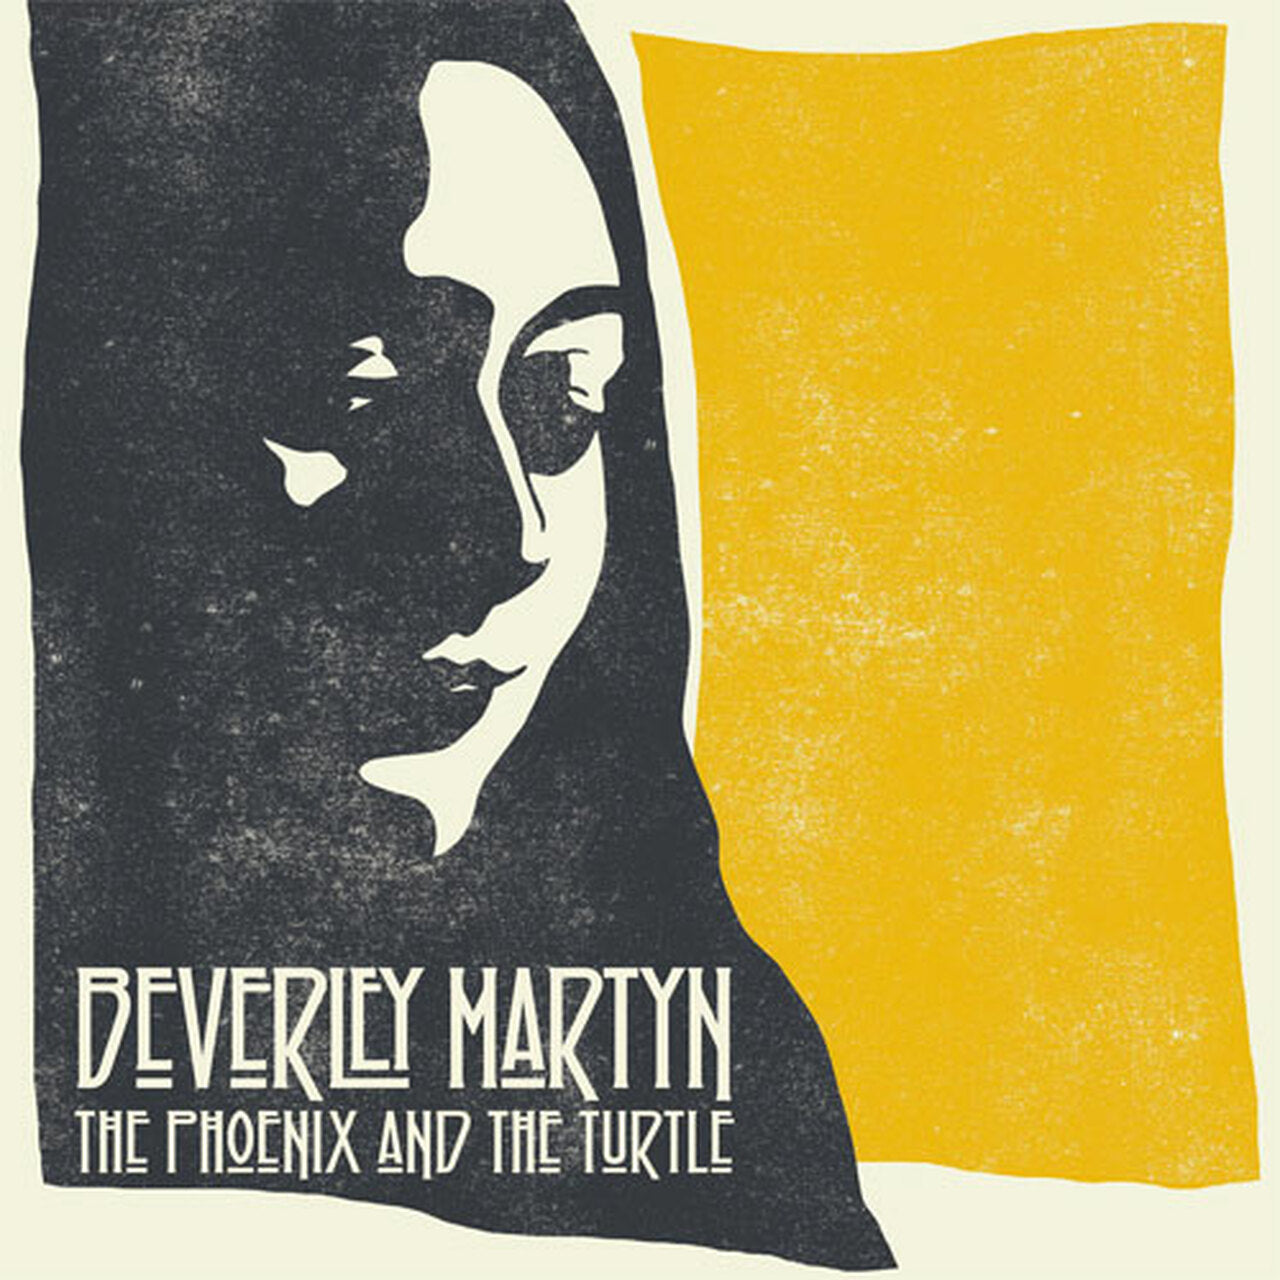 Beverley Martyn - The Phoenix And The Turtle LP (Music On Vinyl, 180g, EU Pressing, Audiophile)